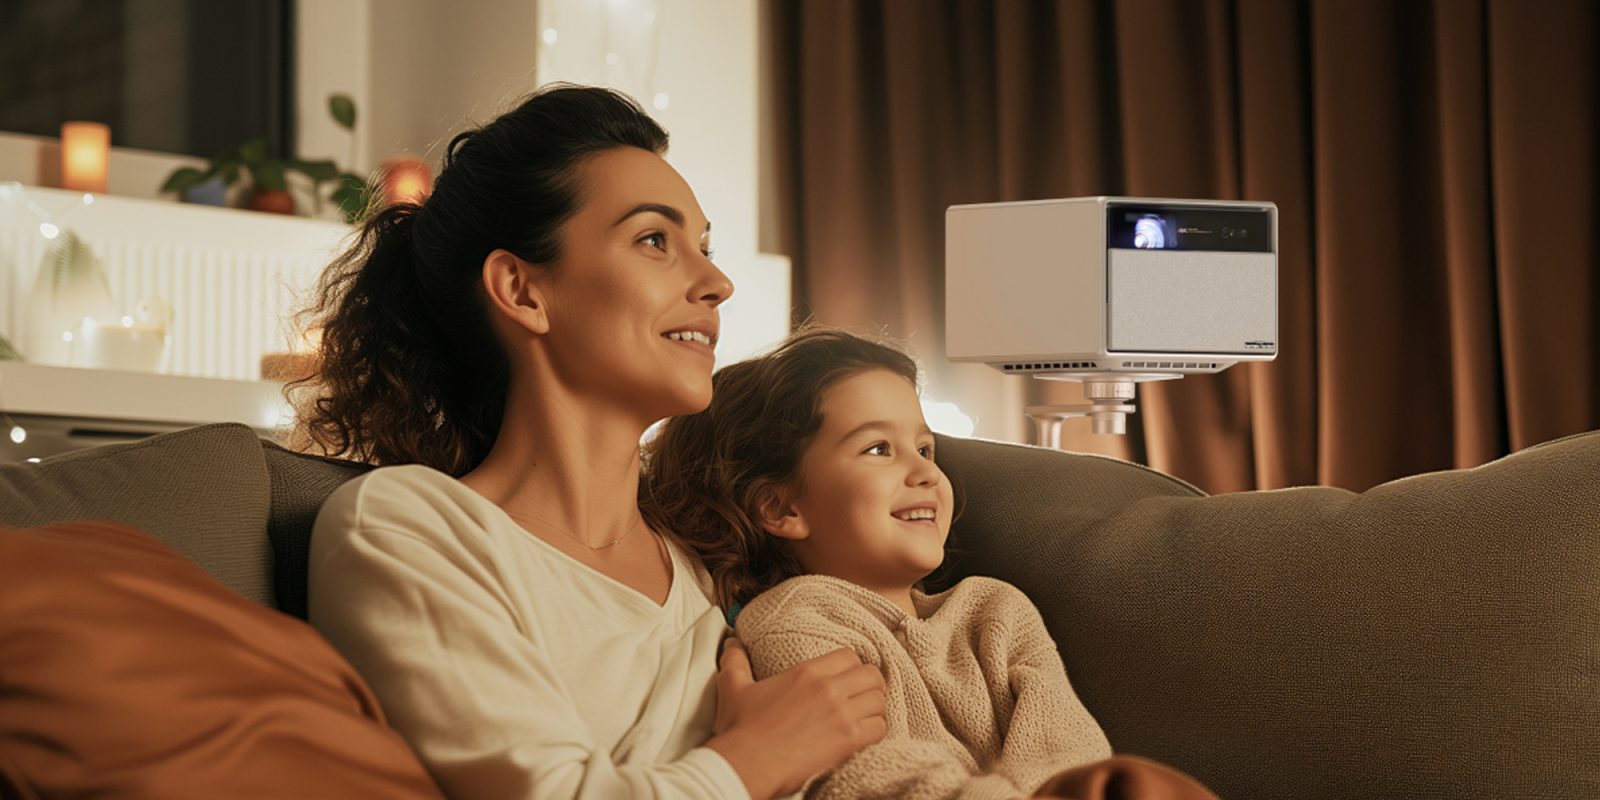 XGIMI offering special Mother's Day discounts on its 1080p/4K projectors